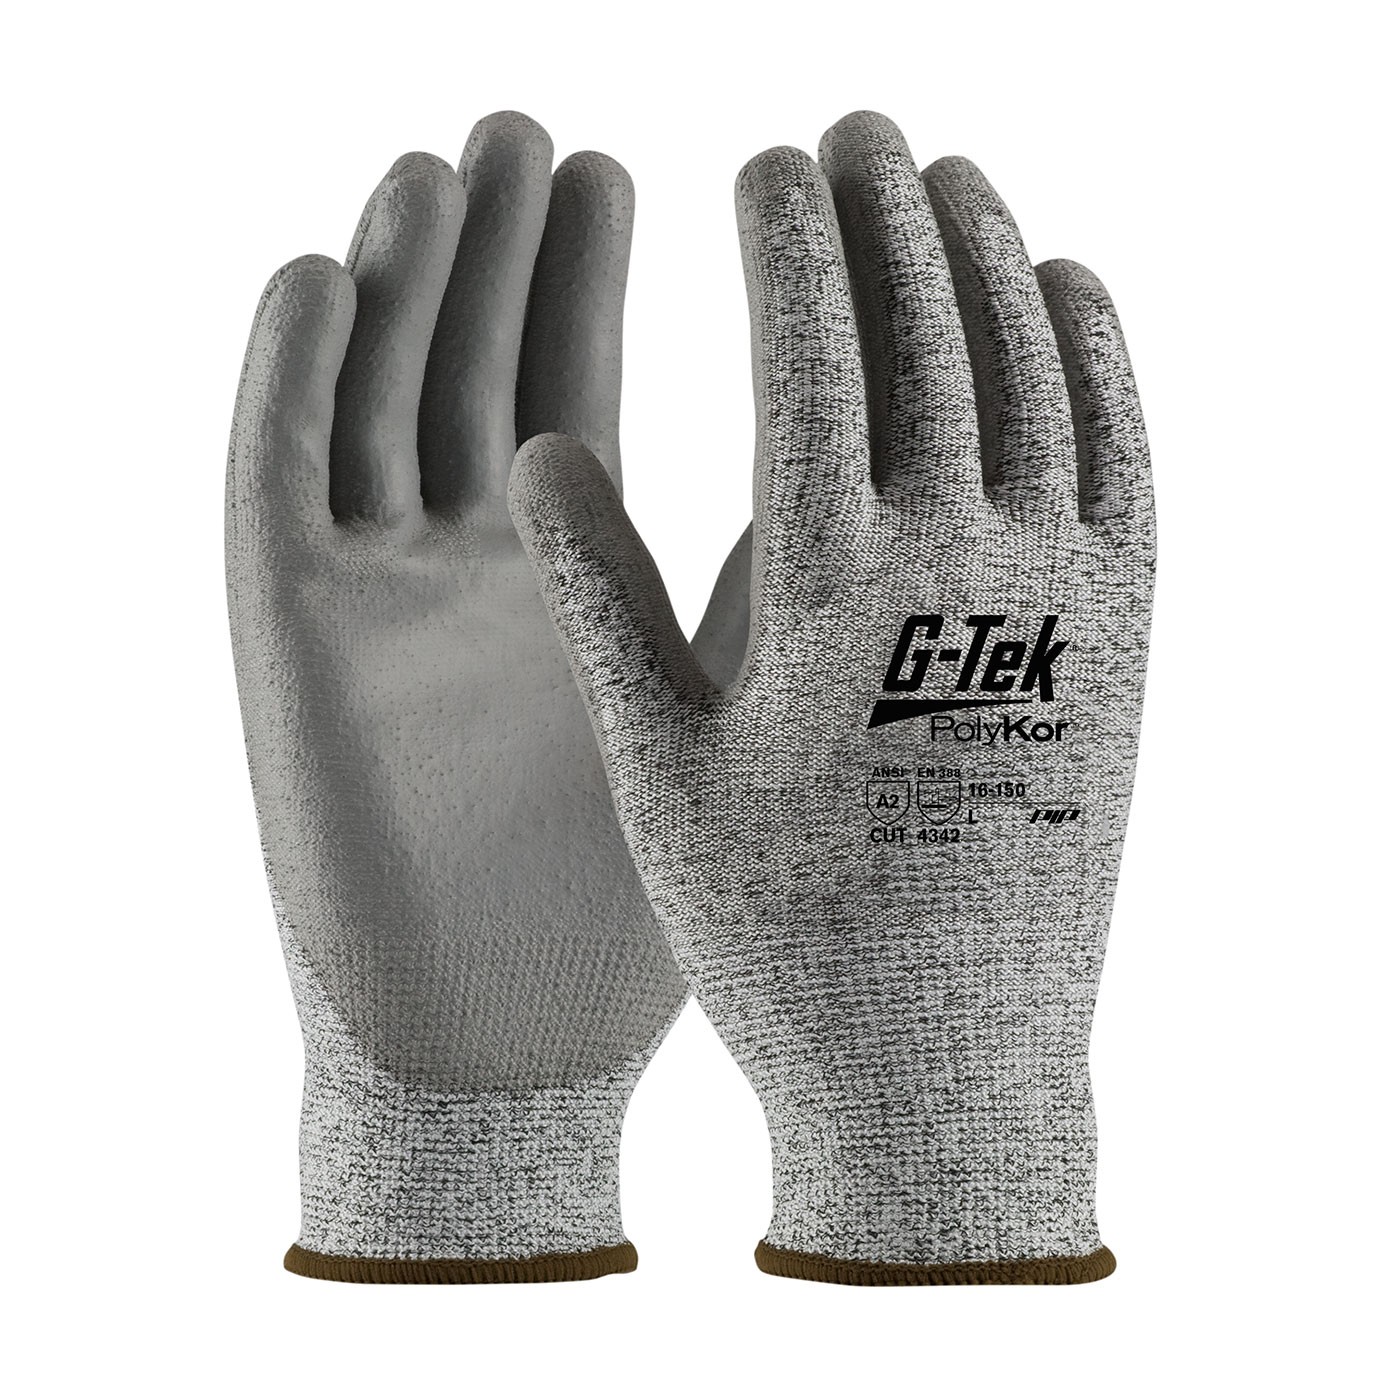 G-Tek® PolyKor® Seamless Knit PolyKor® Blended Glove with Polyurethane Coated Smooth Grip on Palm & Fingers  (#16-150)